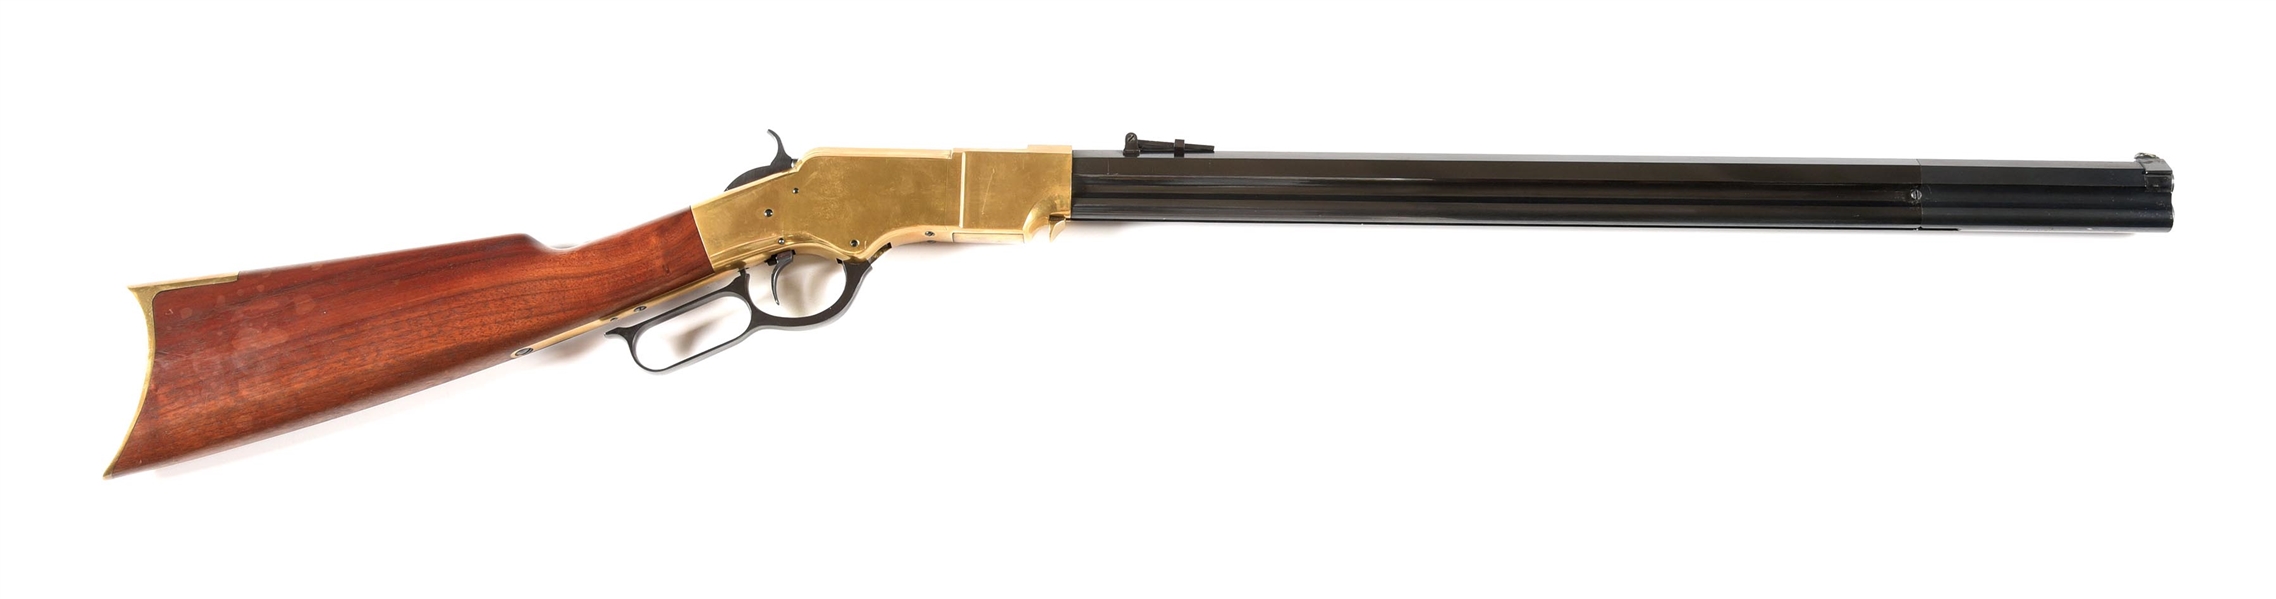 (M) NAVY ARMS M1860 HENRY LEVER ACTION RIFLE.